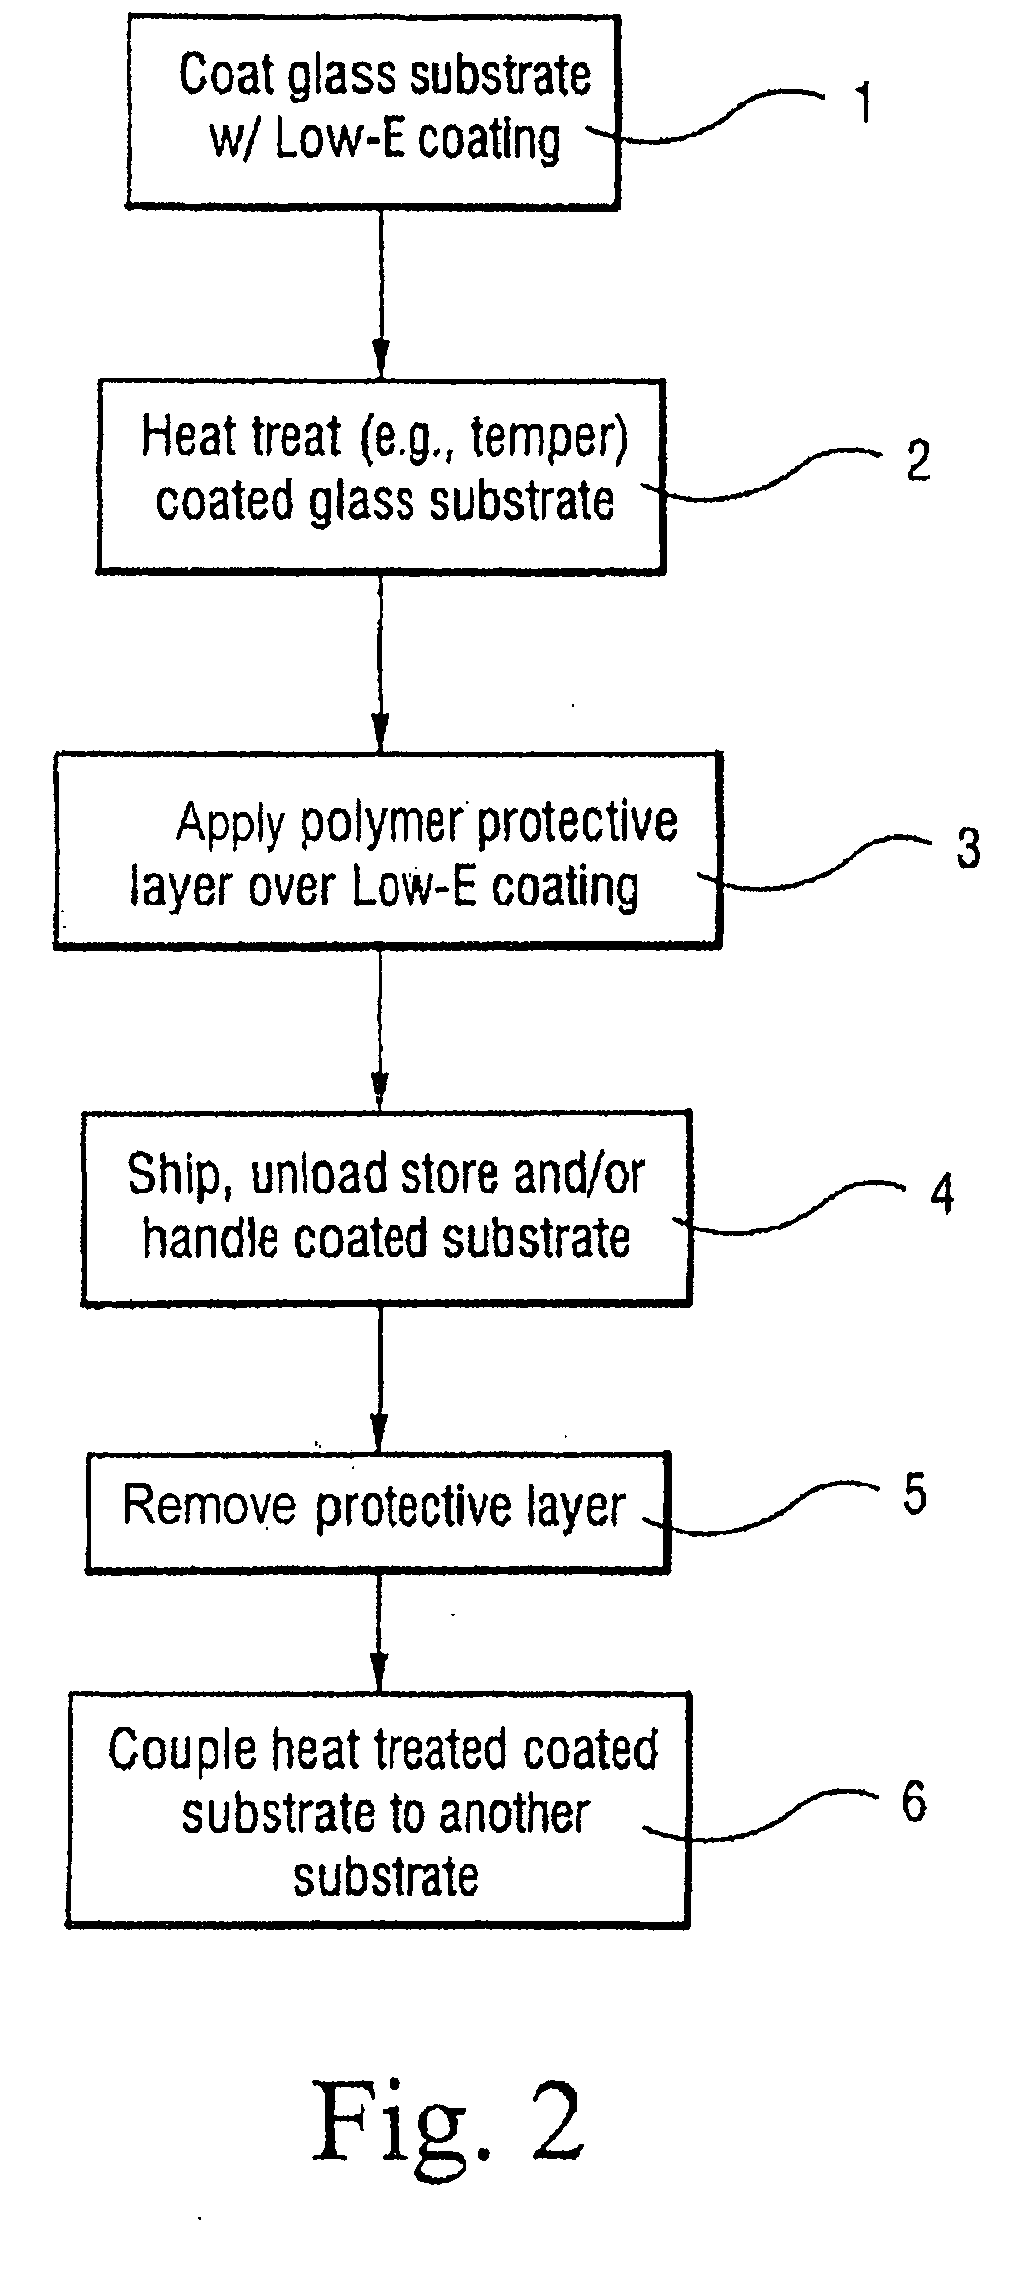 Method of making a heat-treated coated glass article using a polymer dispersion